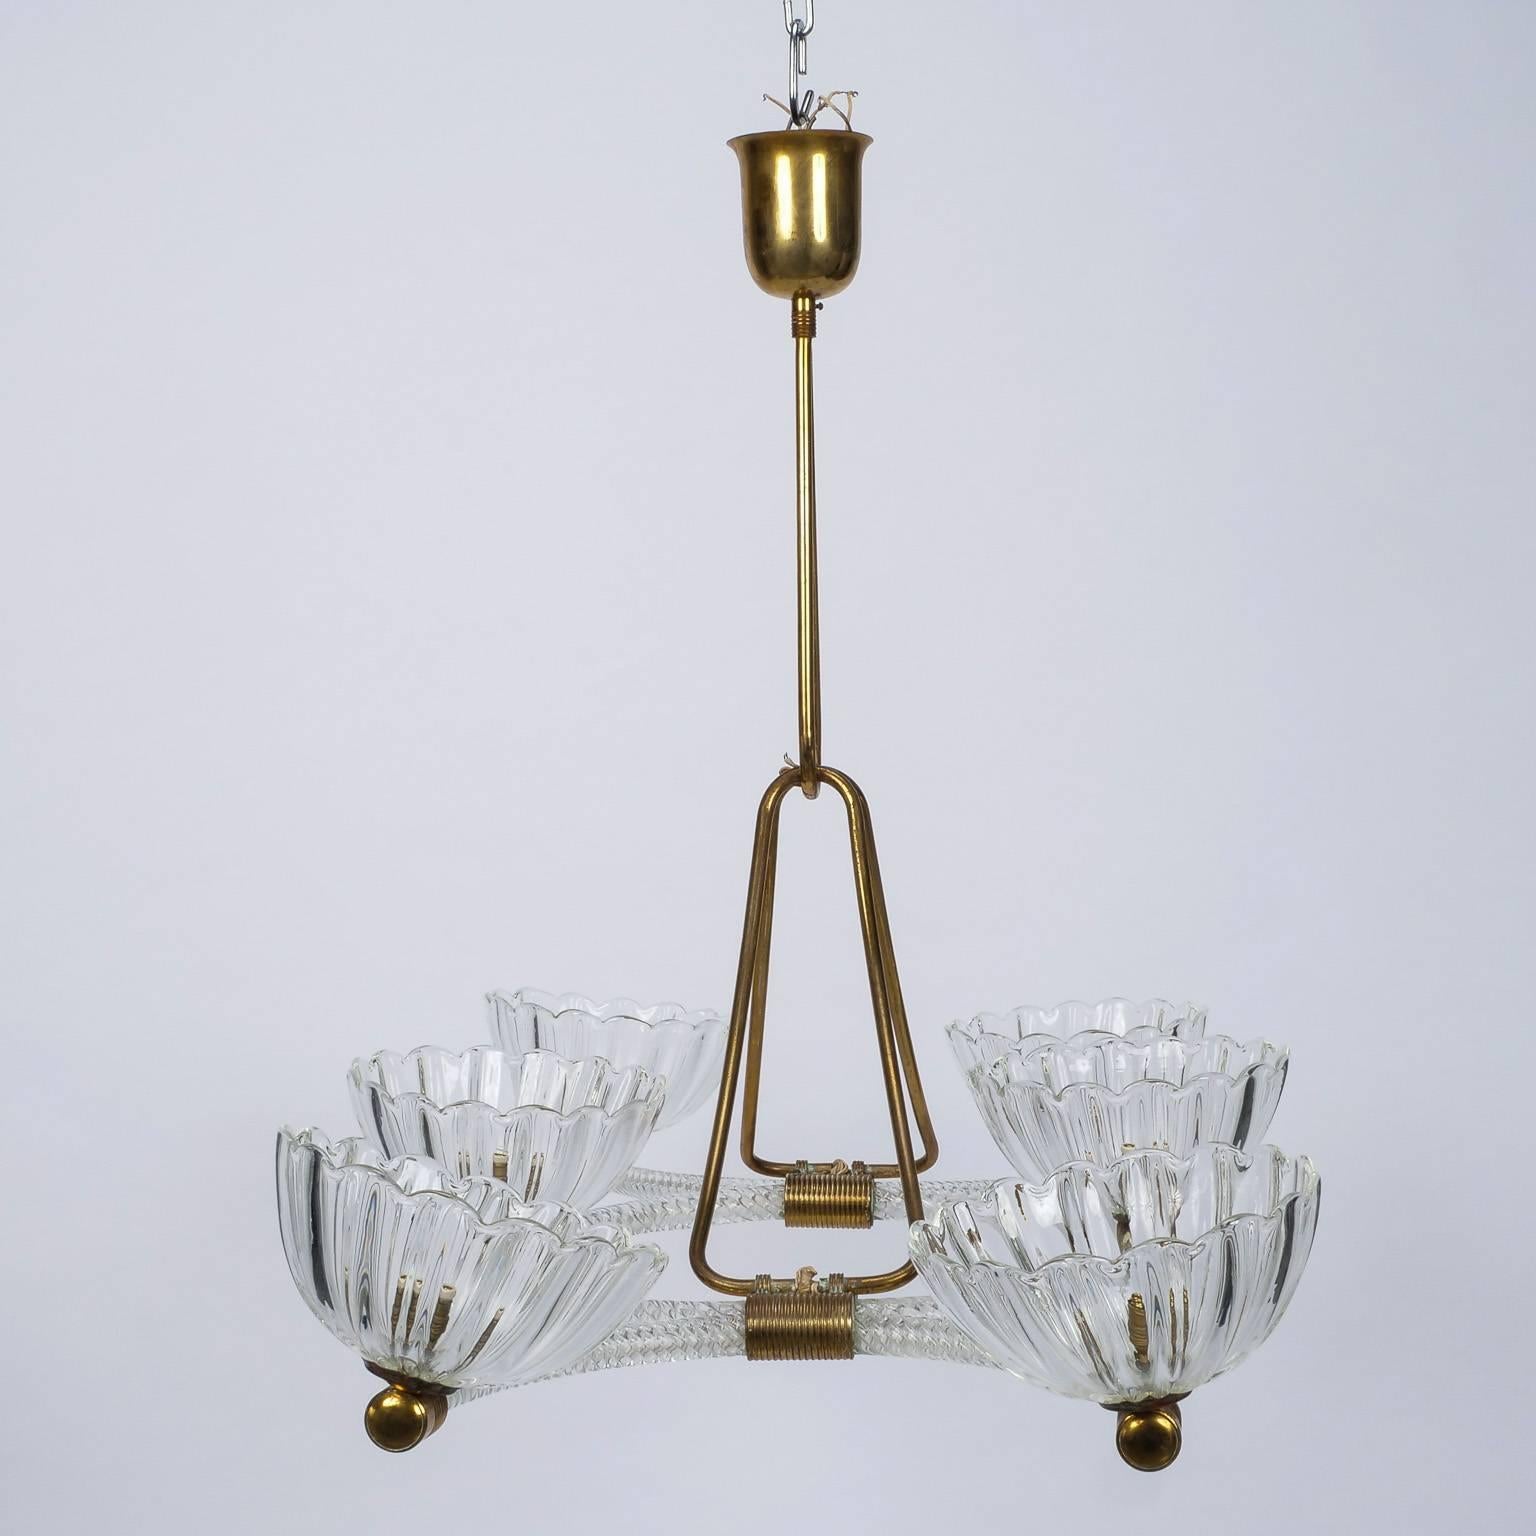 Extra large clear Murano glass six light chandelier attributed to Ercole Barovier, circa 1940s. Chandelier has center ring of ridged glass flanked by an open half circle of glass on each side. Brass suspension and joining hardware, scalloped edge